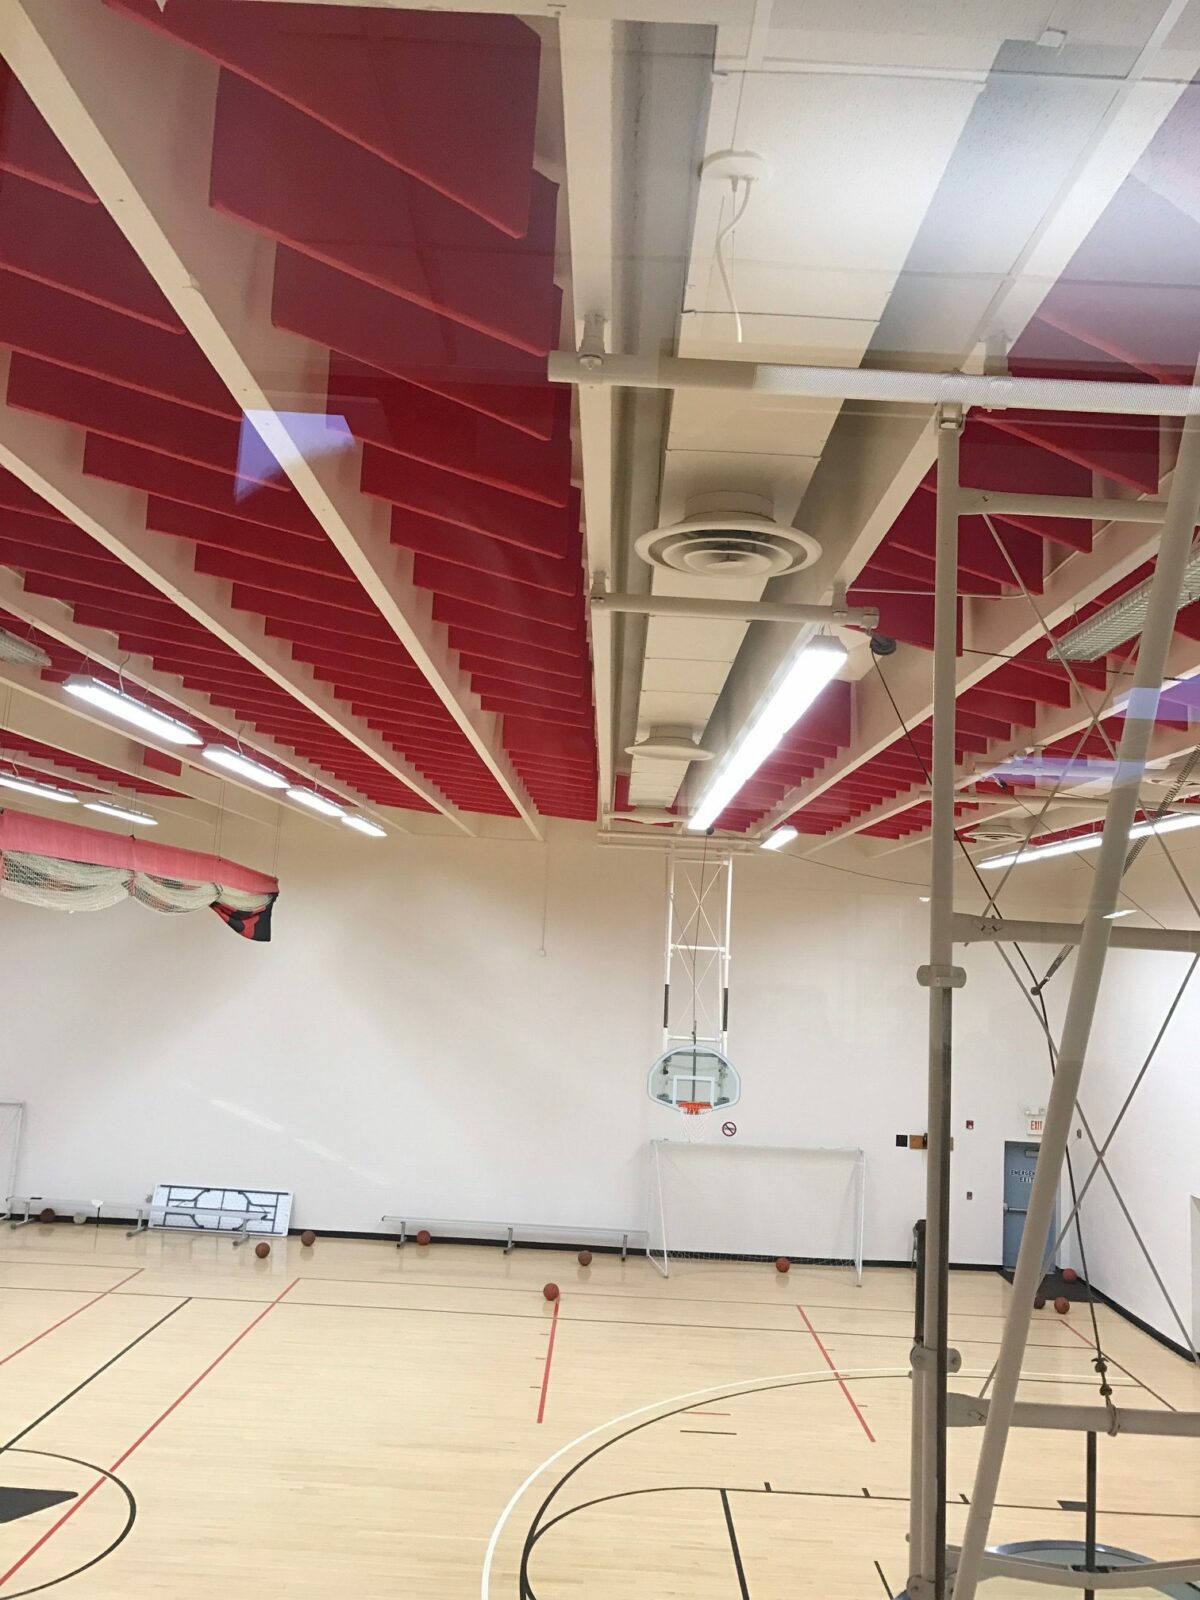 Acoustic Baffles and Hanging Sound Baffles in a Gymnasium